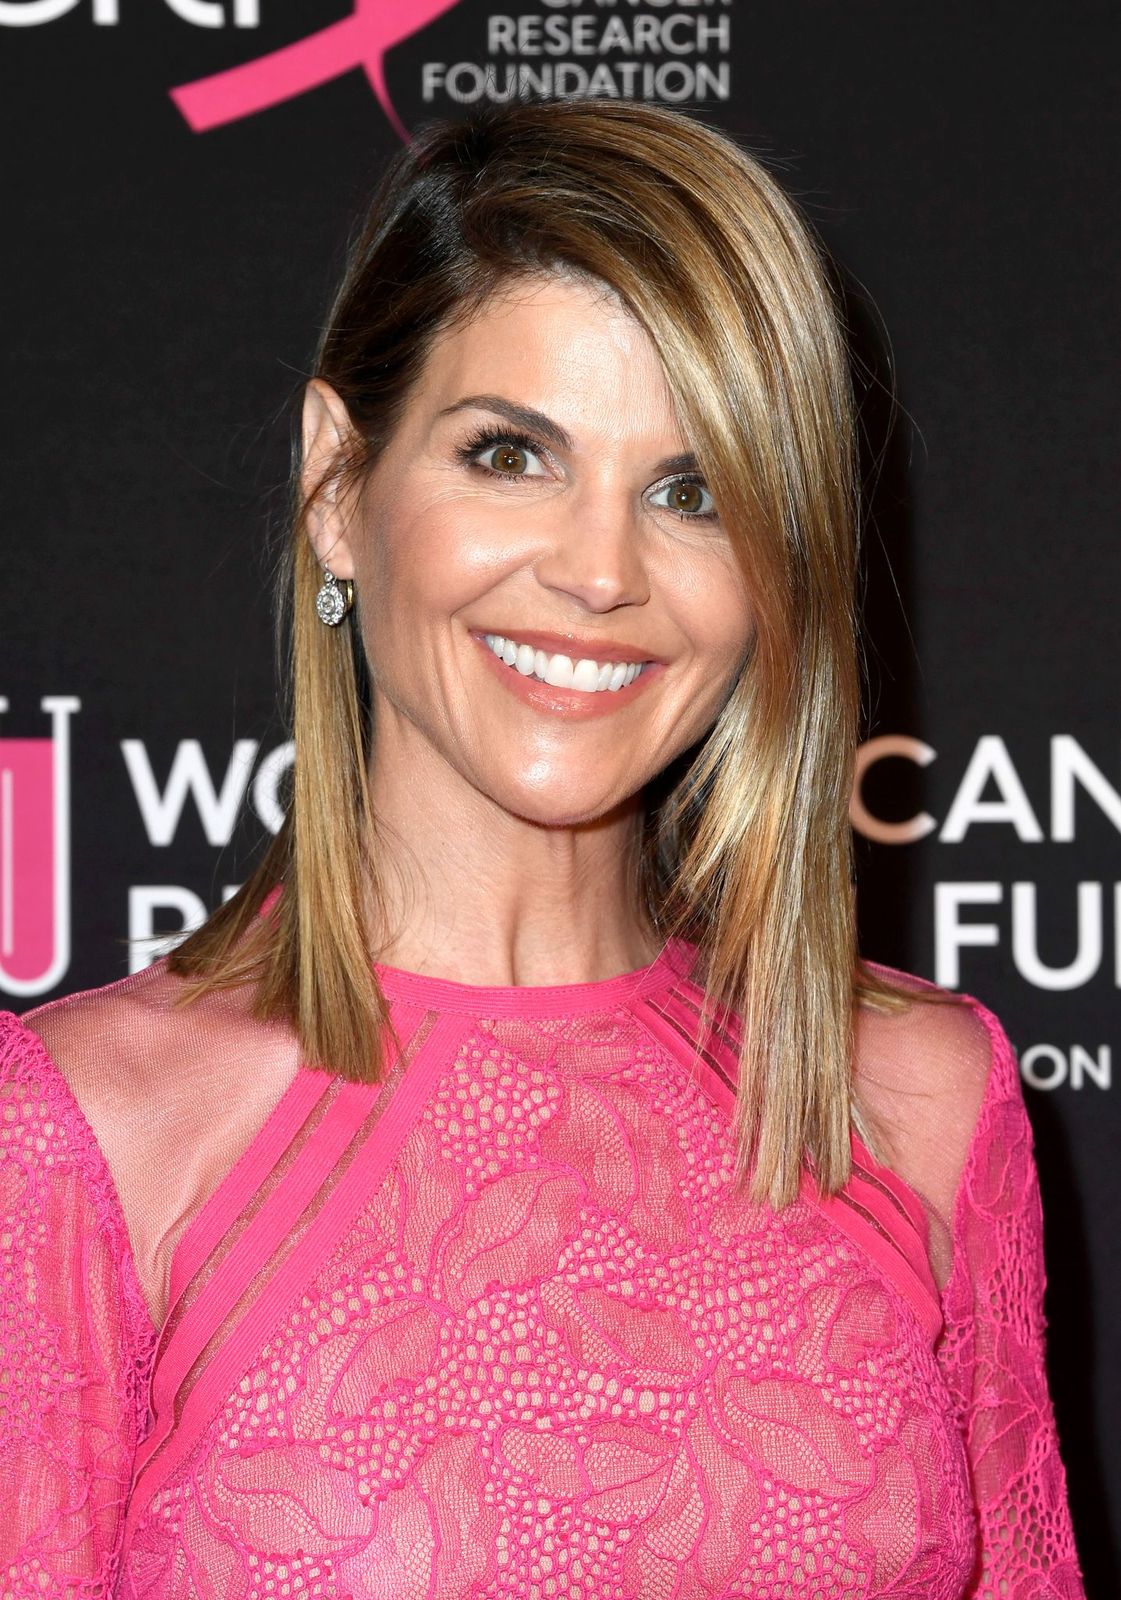 Lori Loughlin at The Women's Cancer Research Benefit Gala at the Beverly Wilshire Four Seasons Hotel on February 28, 2019 | Photo: Getty Images